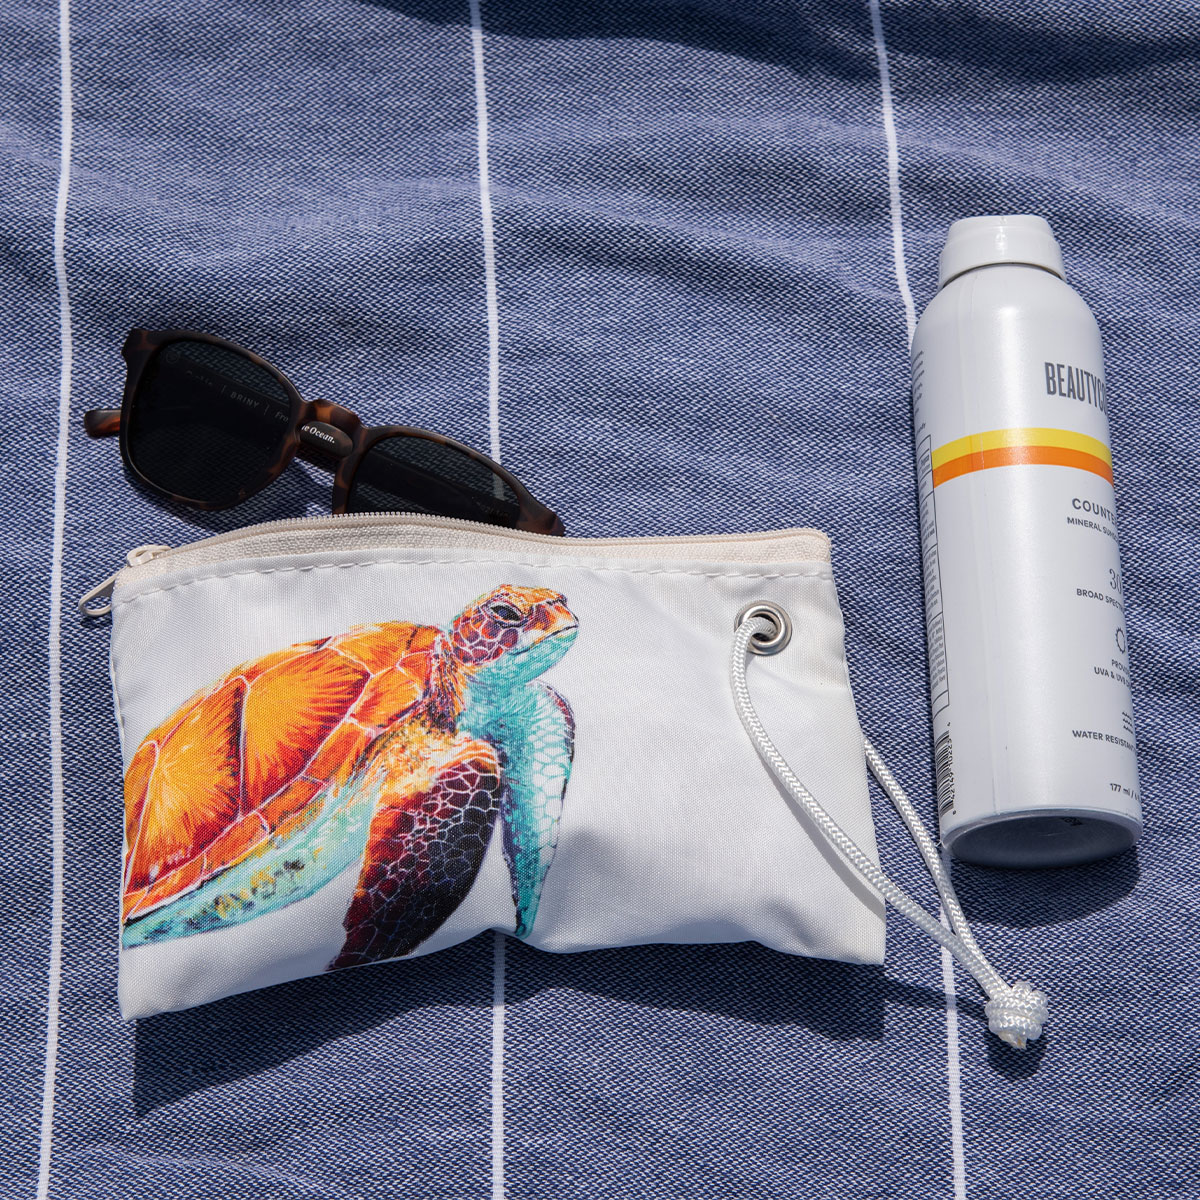 a bright friendly multicolor sea turtle is printed on a white recycled sail cloth wristlet sits on a blue beach towel next to a water bottle